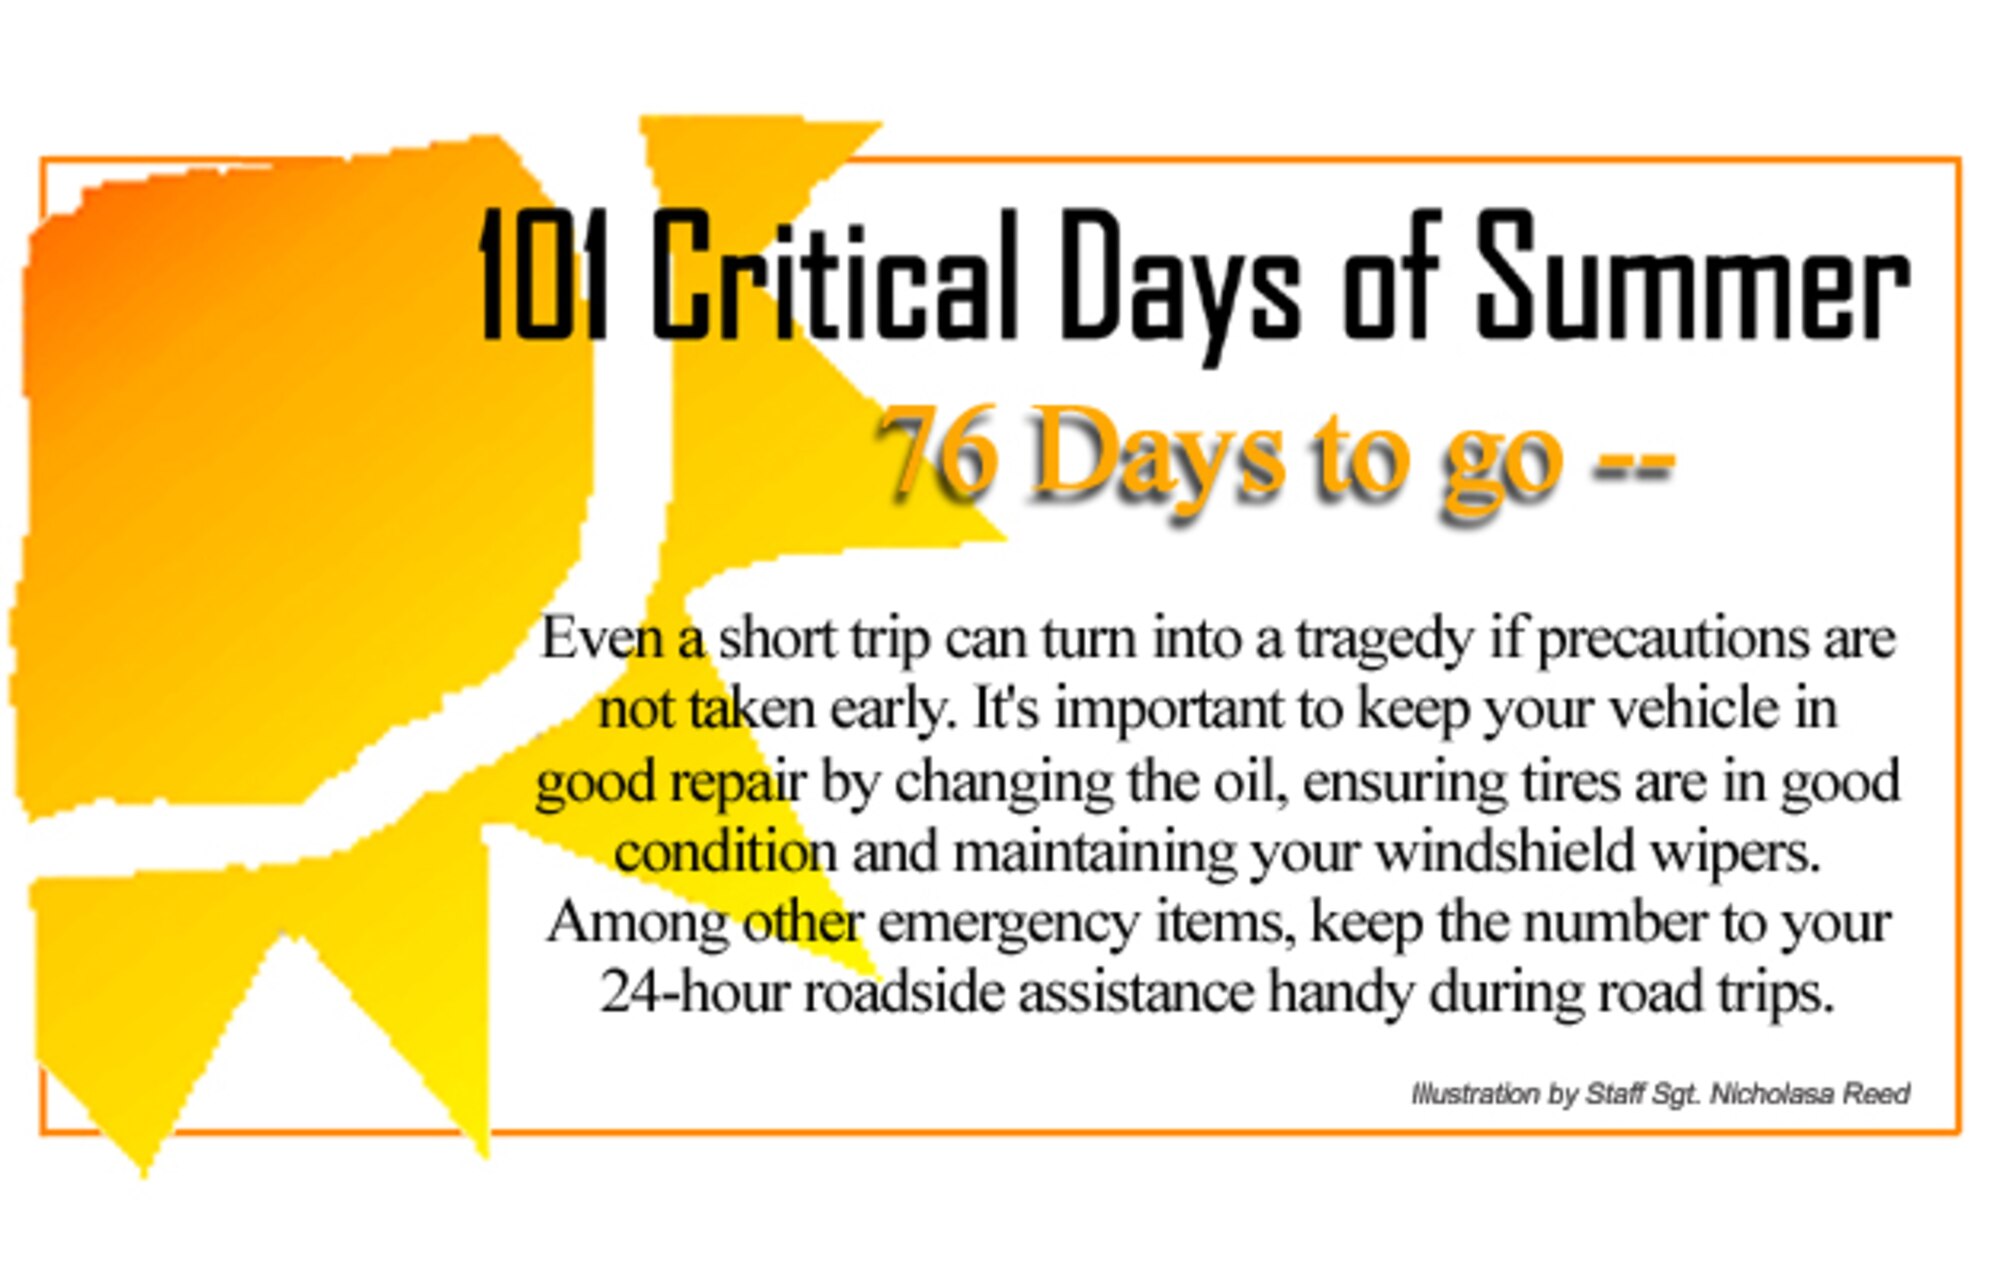 Even a short trip can turn into a tragedy if precautions are not taken early. It's important to keep your vehicle in good repair by changing the oil, ensuring tires are in good condition and maintaining your windshield wipers. Among other emergency items, keep the number to your 24-hour roadside assistance handy during road trips.